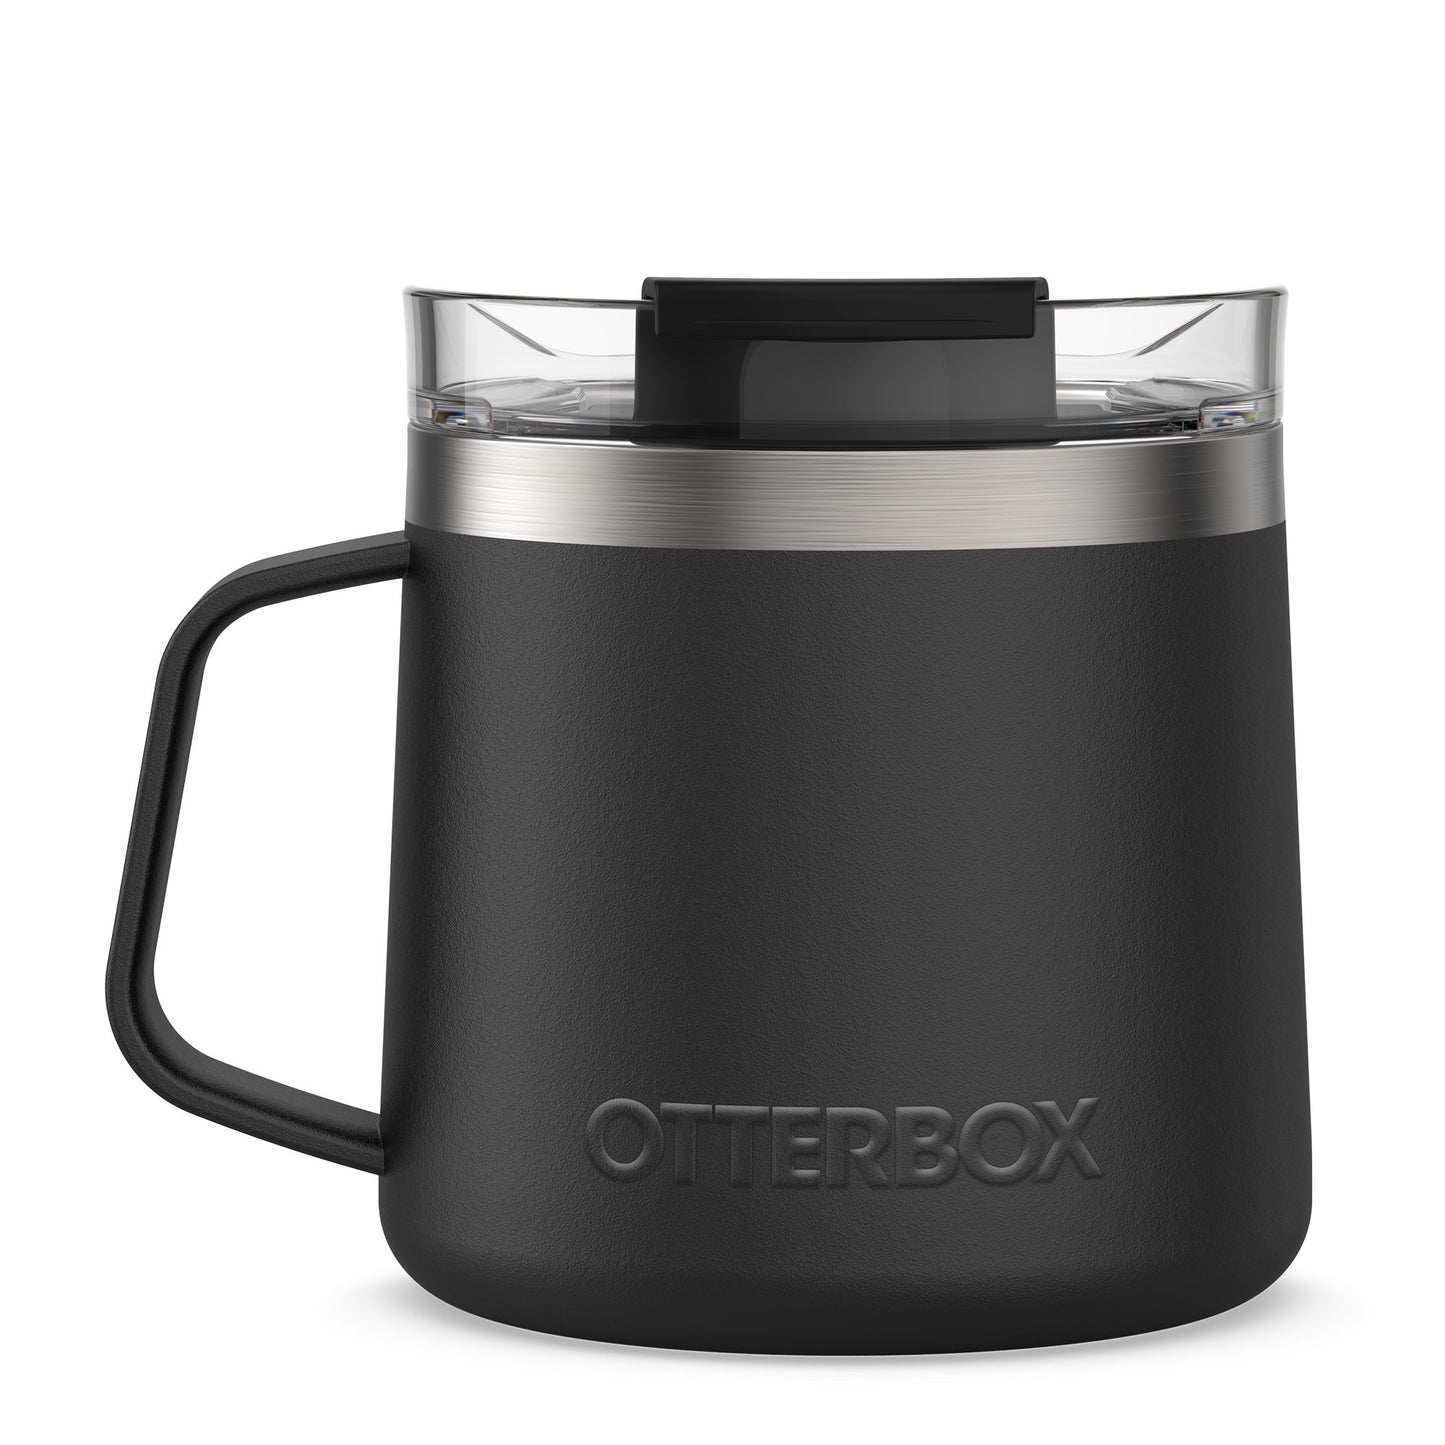 Otterbox Stainless Steel Elevation 14oz Mug w/ Closed Lid - Black (Silver Panther) - 15-11521